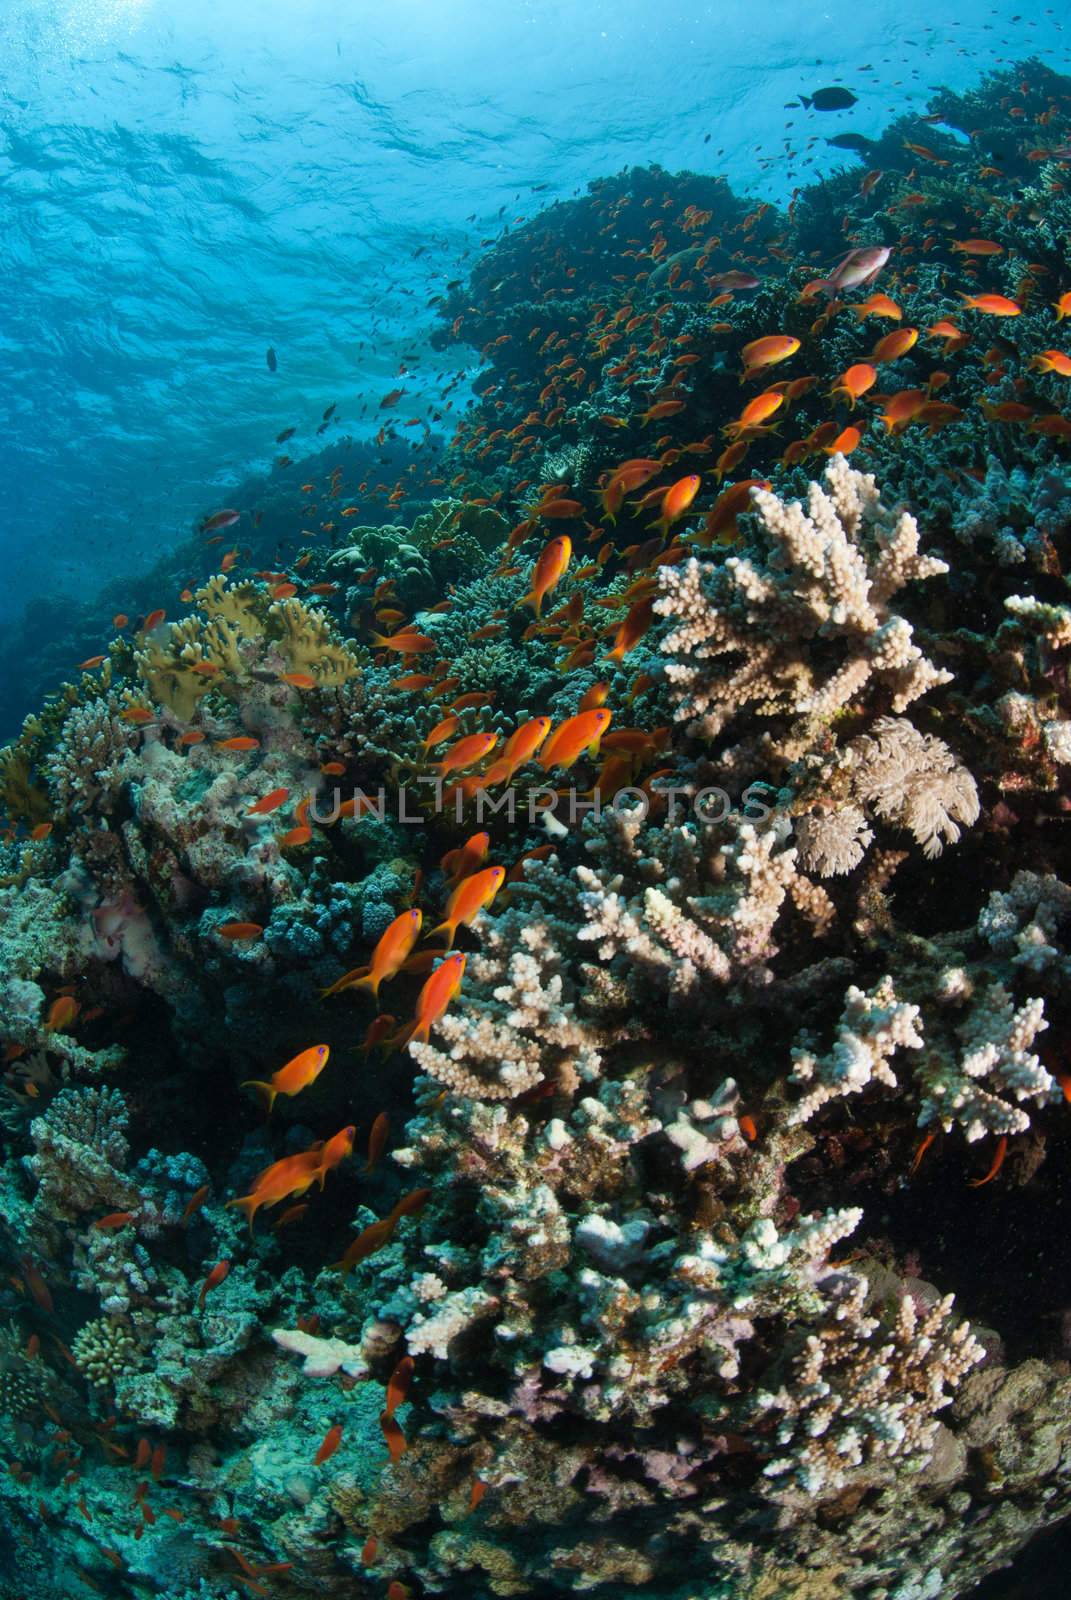 The view of schooling fish swimming around a sunlit reef, Red Sea, Egypt